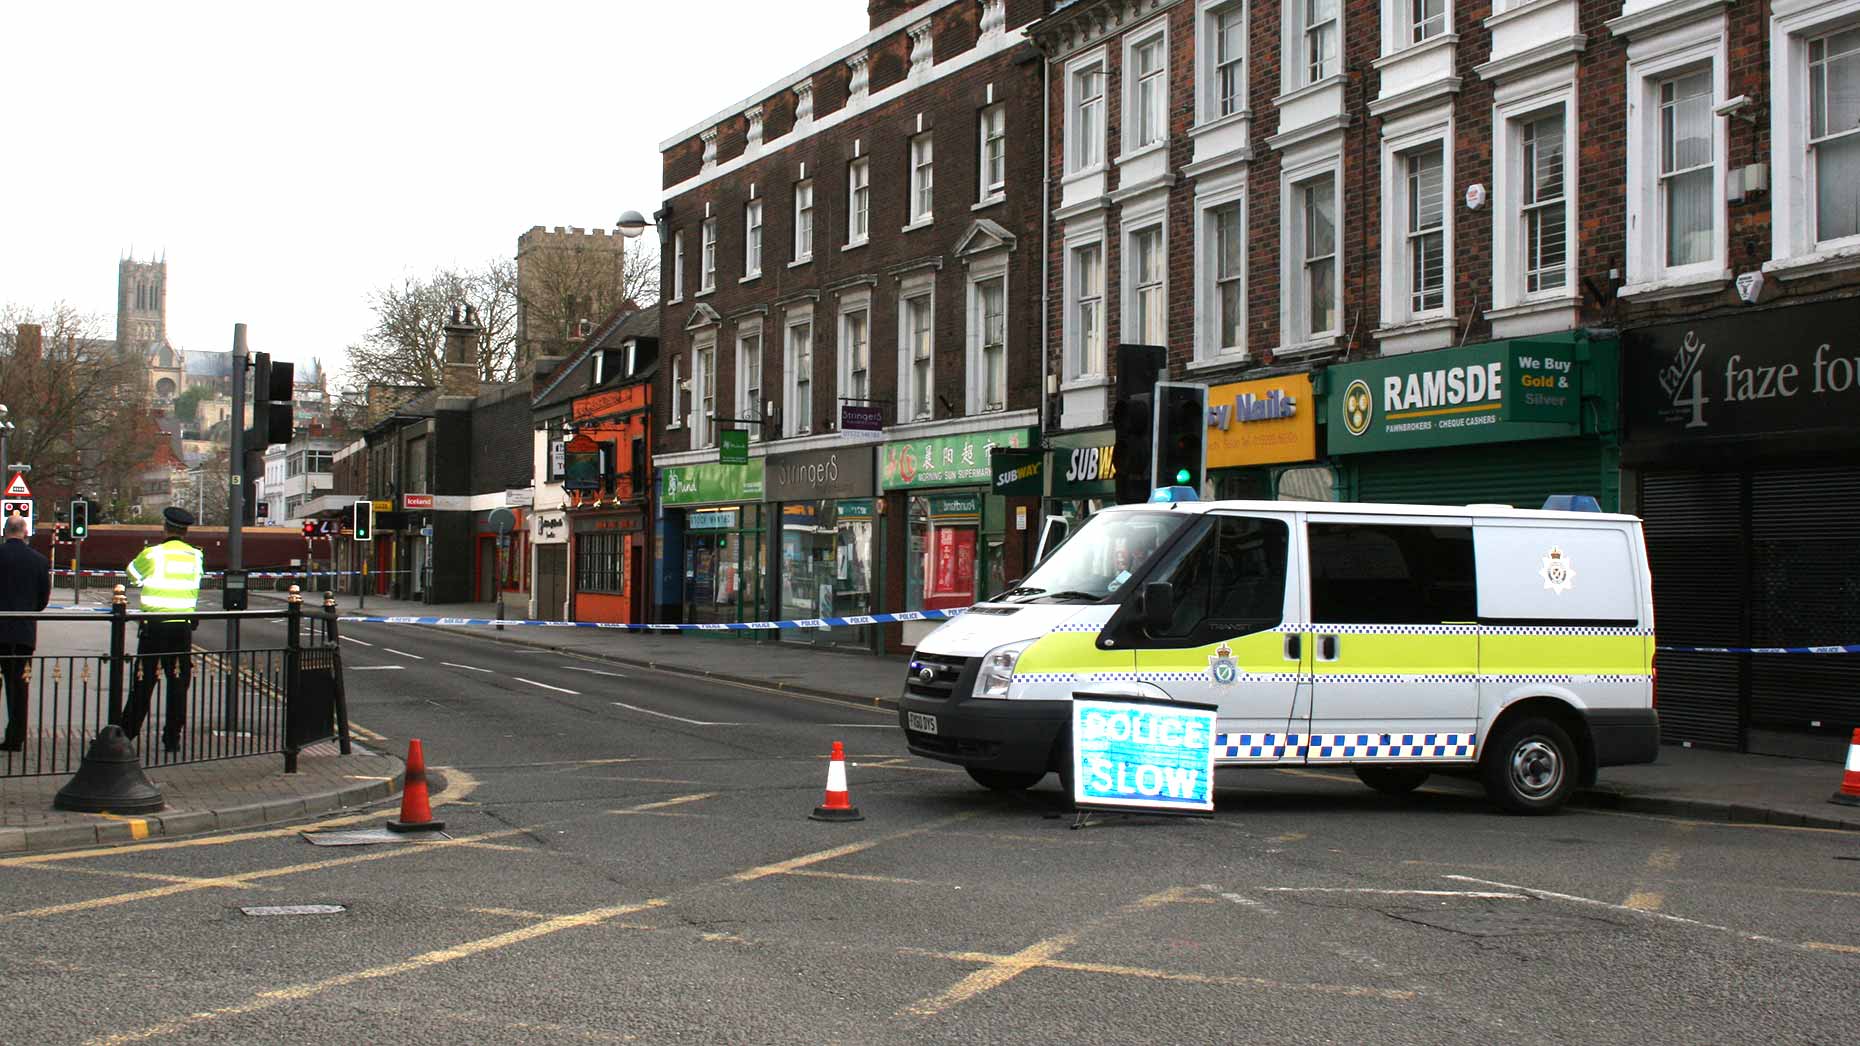 Lincoln High Street closed for police investigations on April 9, 2014.